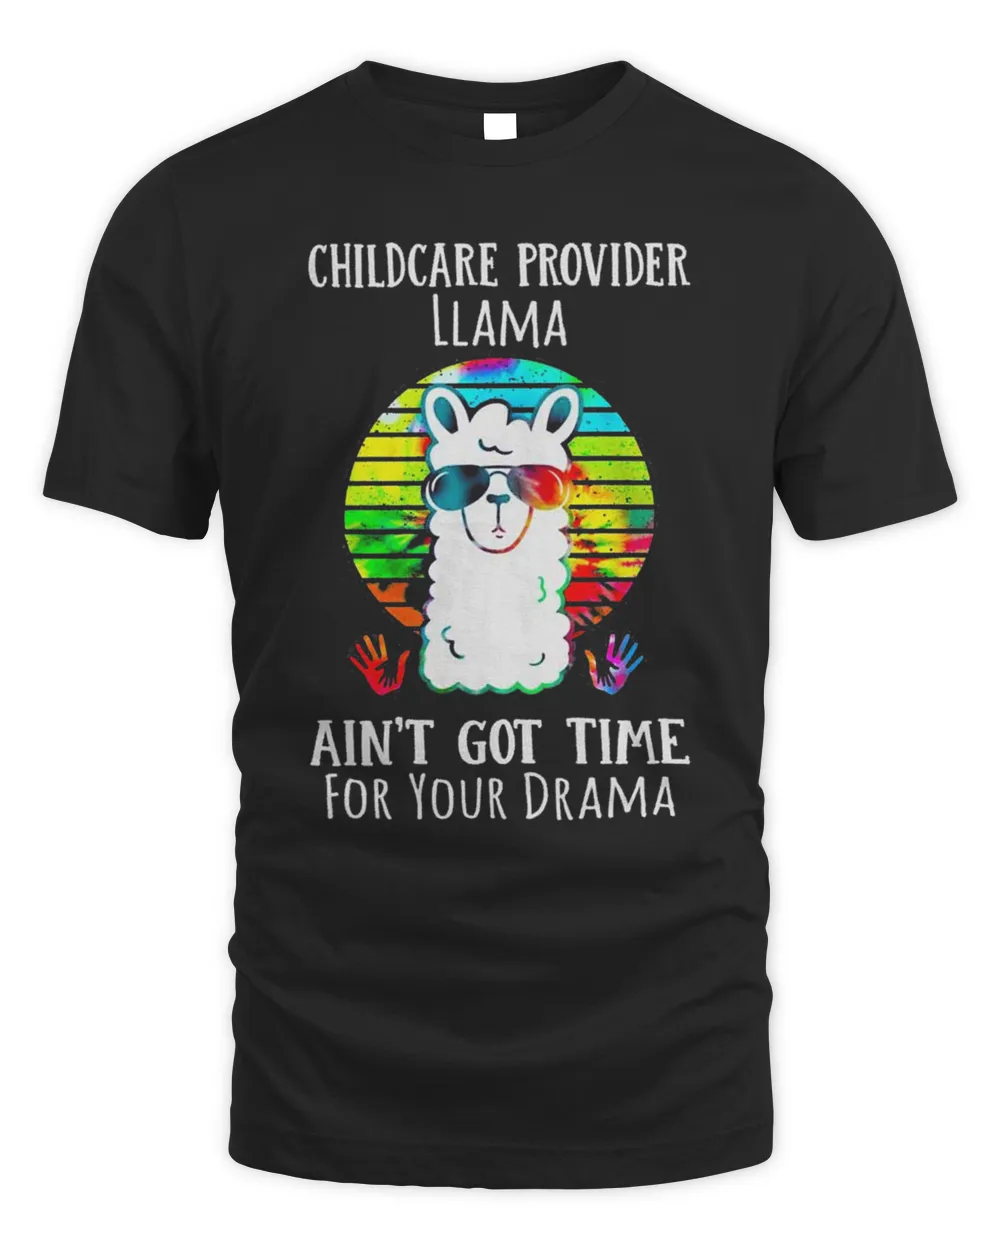 Childcare Provider Llama Ain't Got Time For Your Drama Shirt